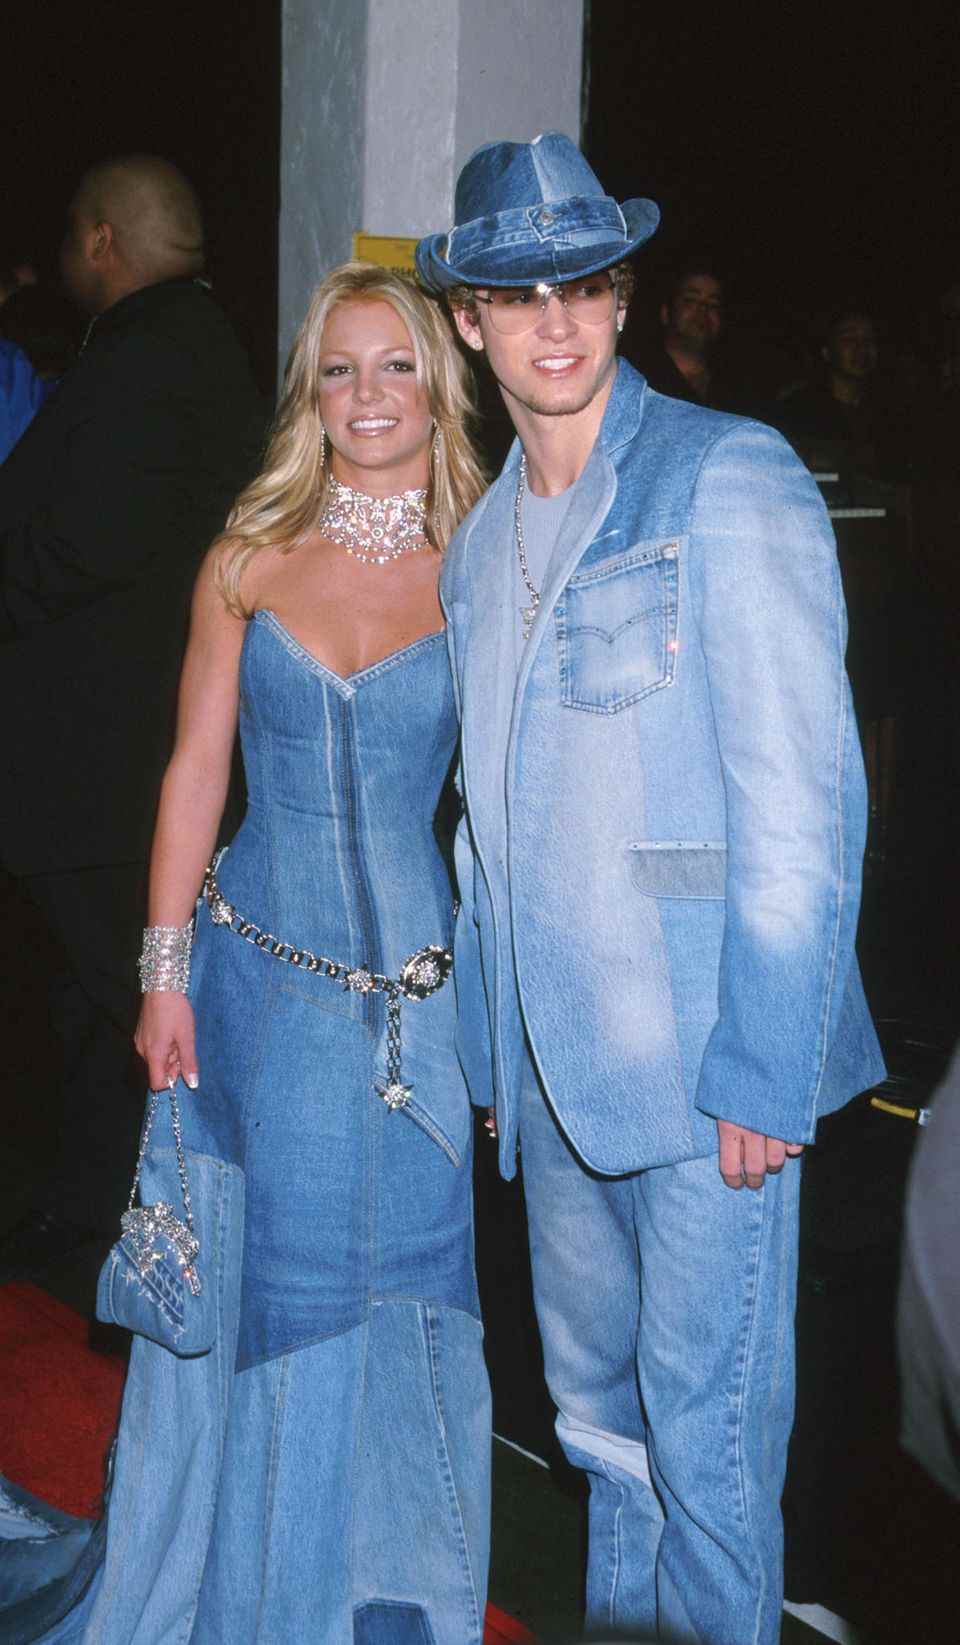 At the American Music Awards in 2001, Britney Spears and Justin Timberlake – THE dream couple of the pop business at the time – appeared in all-over denim looks.  To this day it remains one of the most famous partner looks and a popular costume idea for couples. 